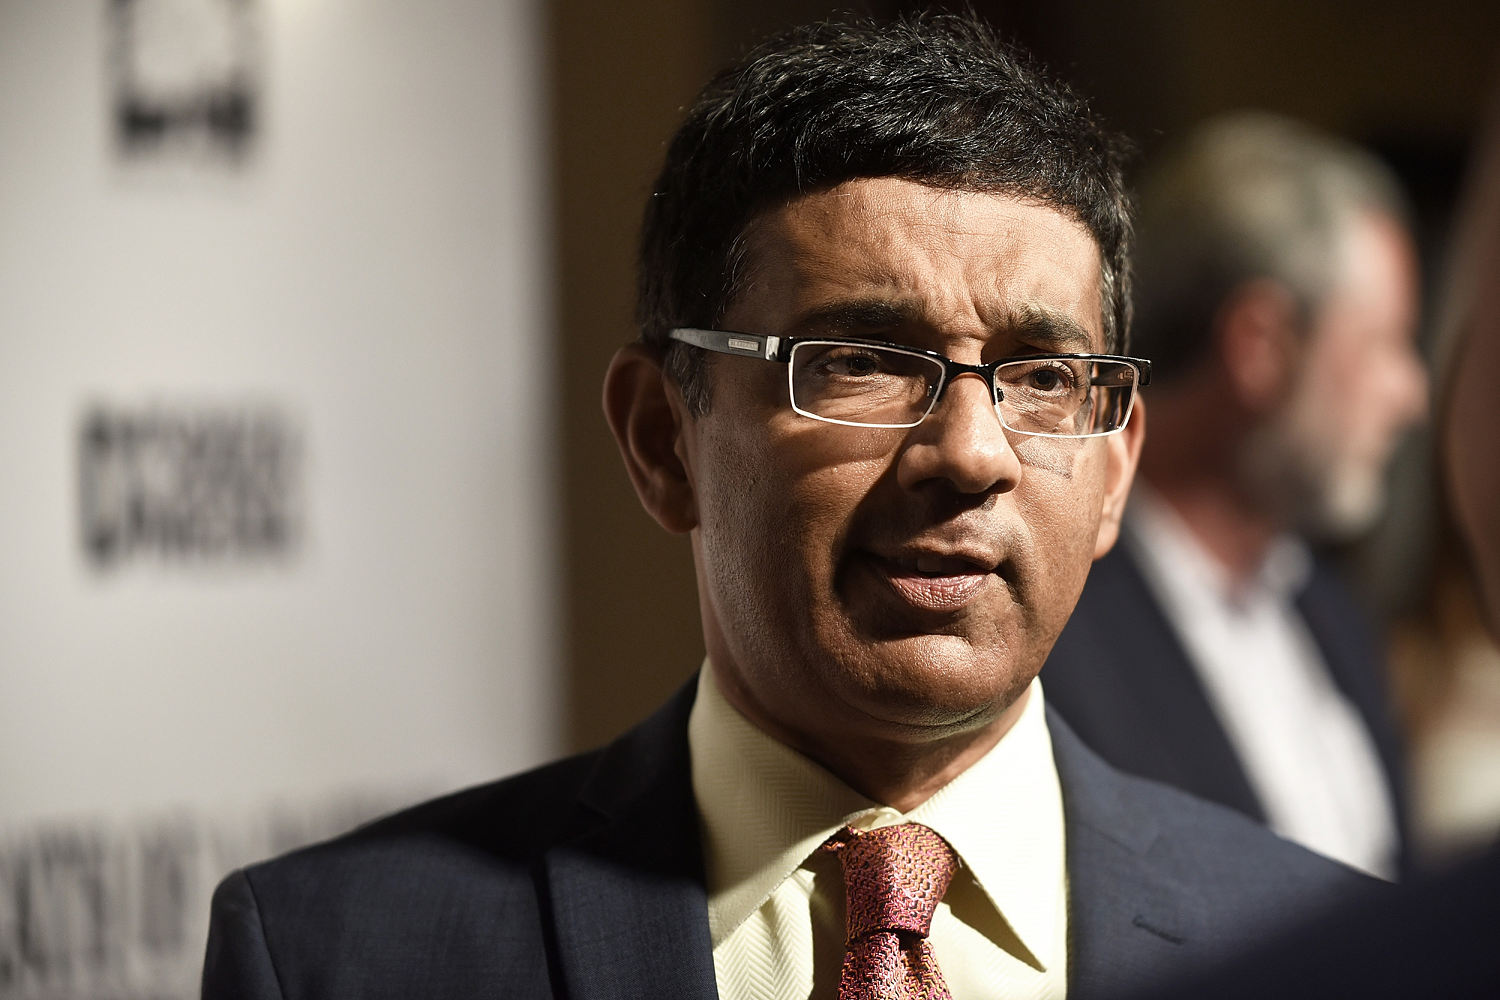 Dinesh D’Souza election fraud film, book ‘2000 Mules’ pulled after defamation suit